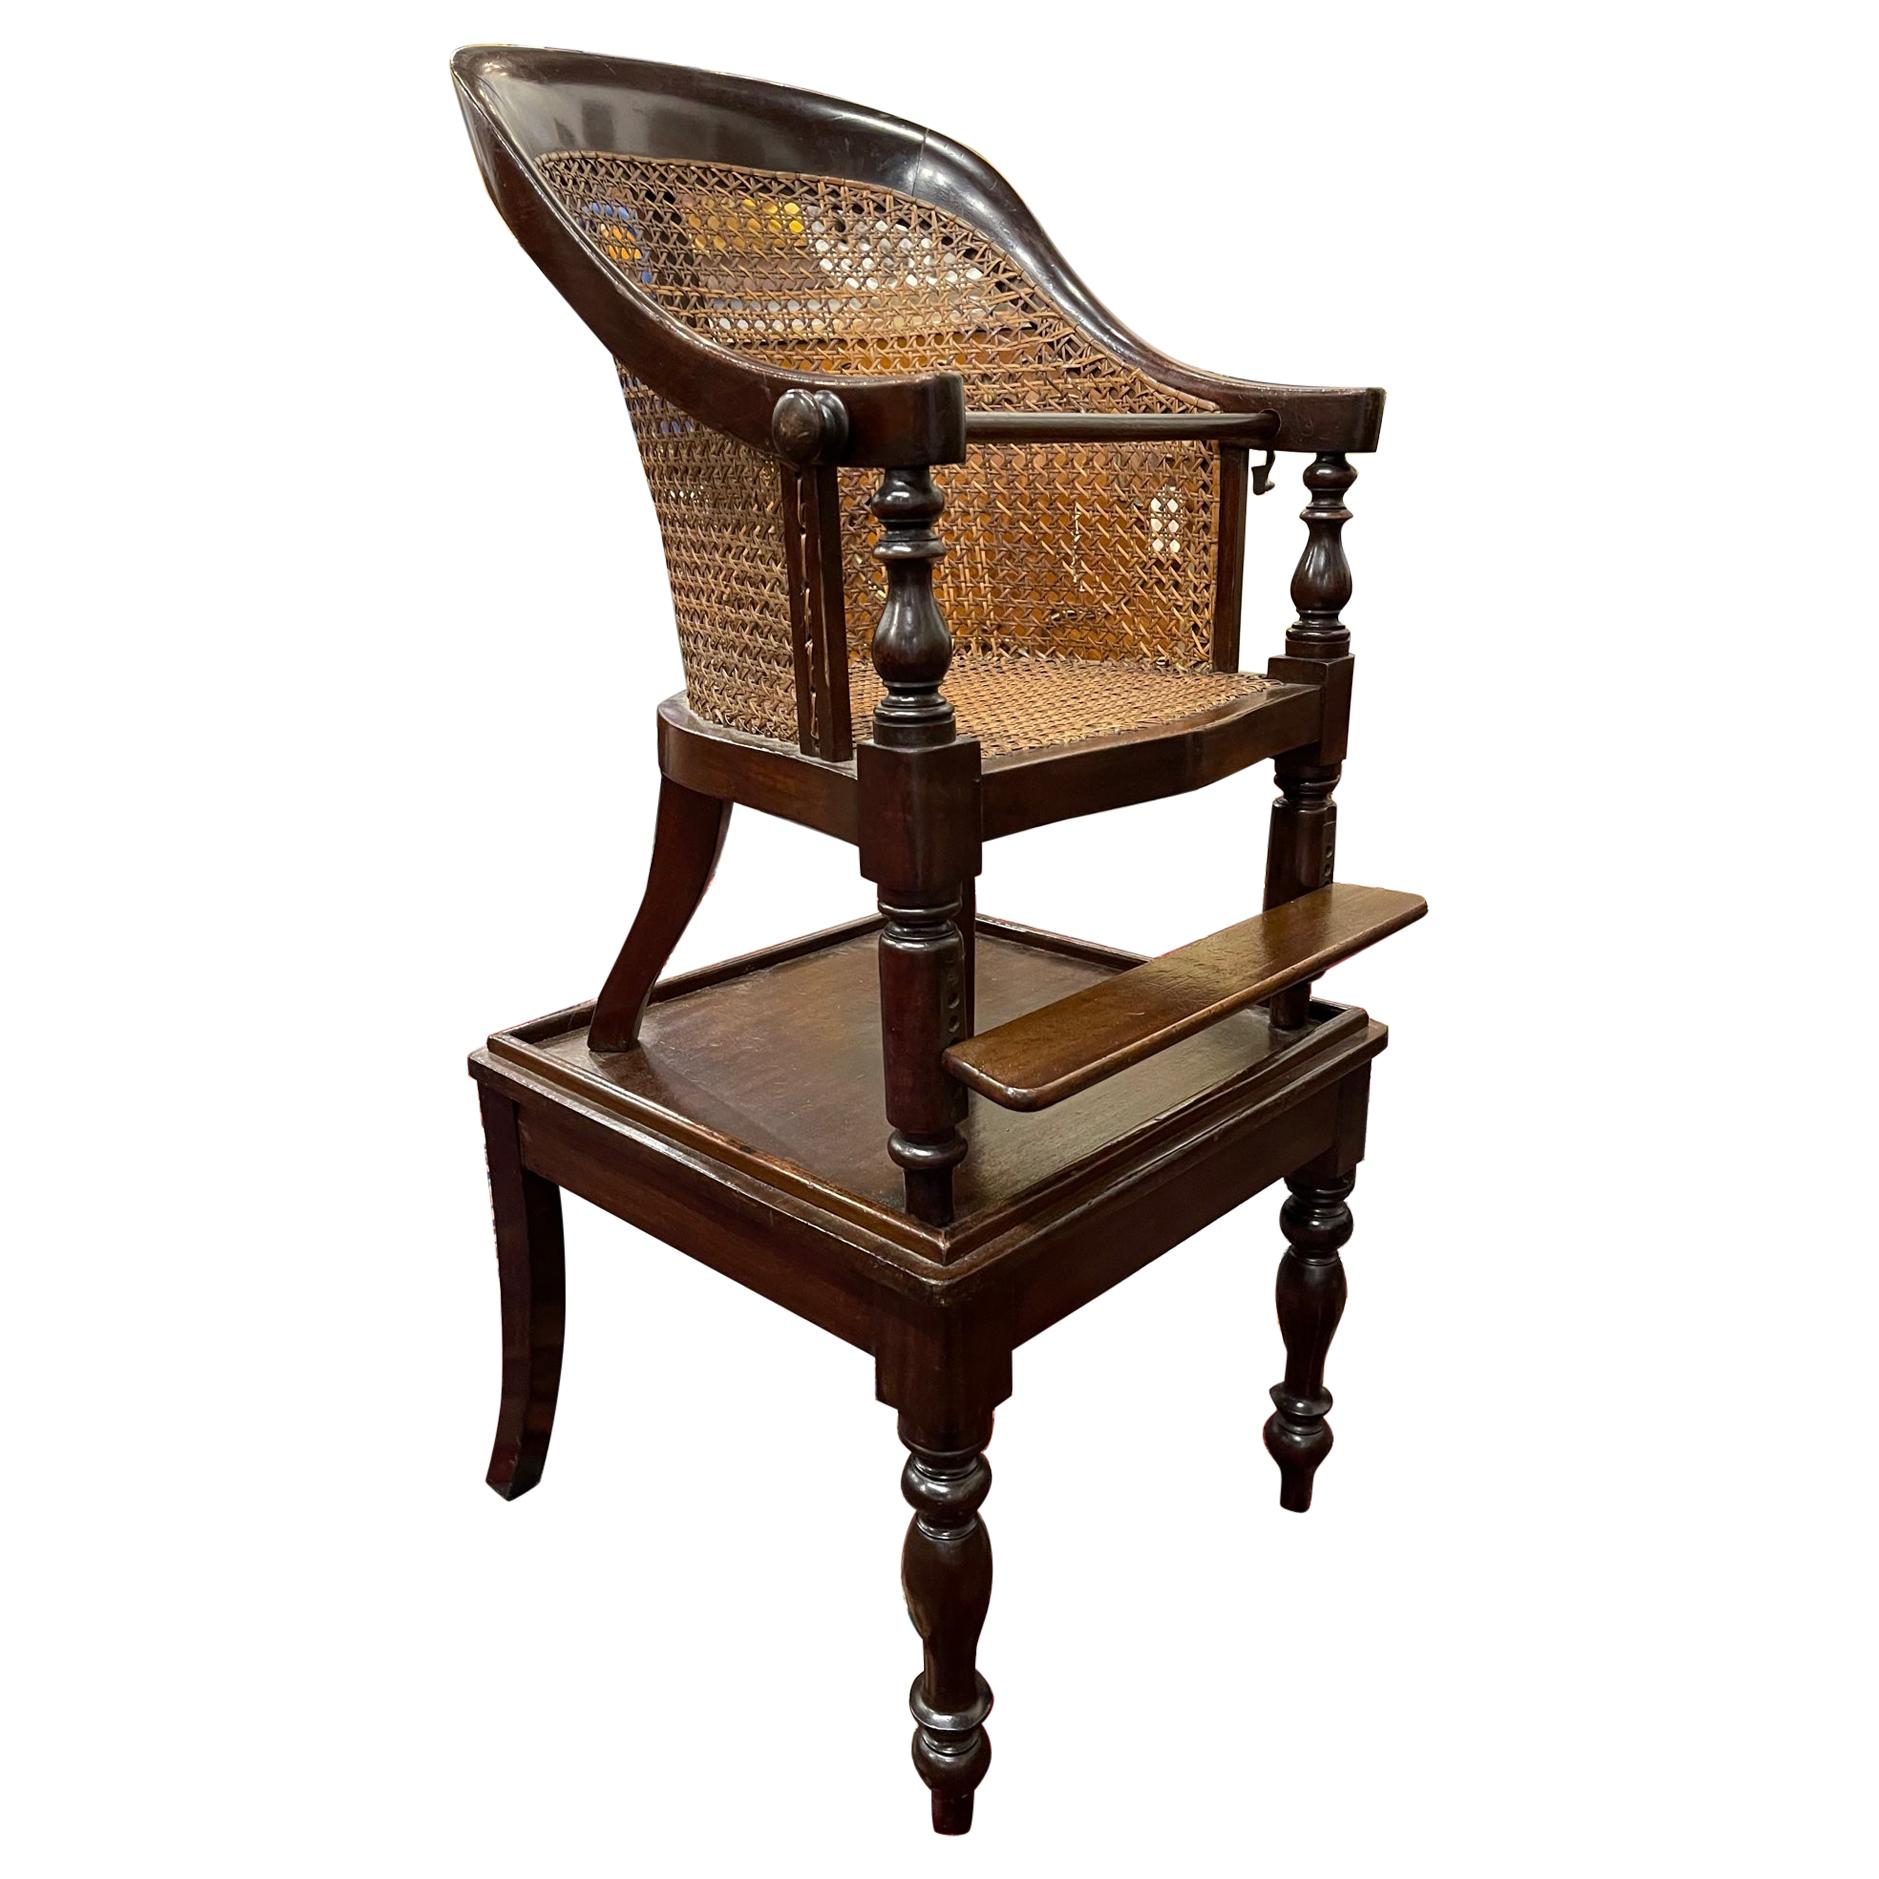 Regency Mahogany Child's Chair with an Adjustable Foot Rail, circa 1830 For Sale